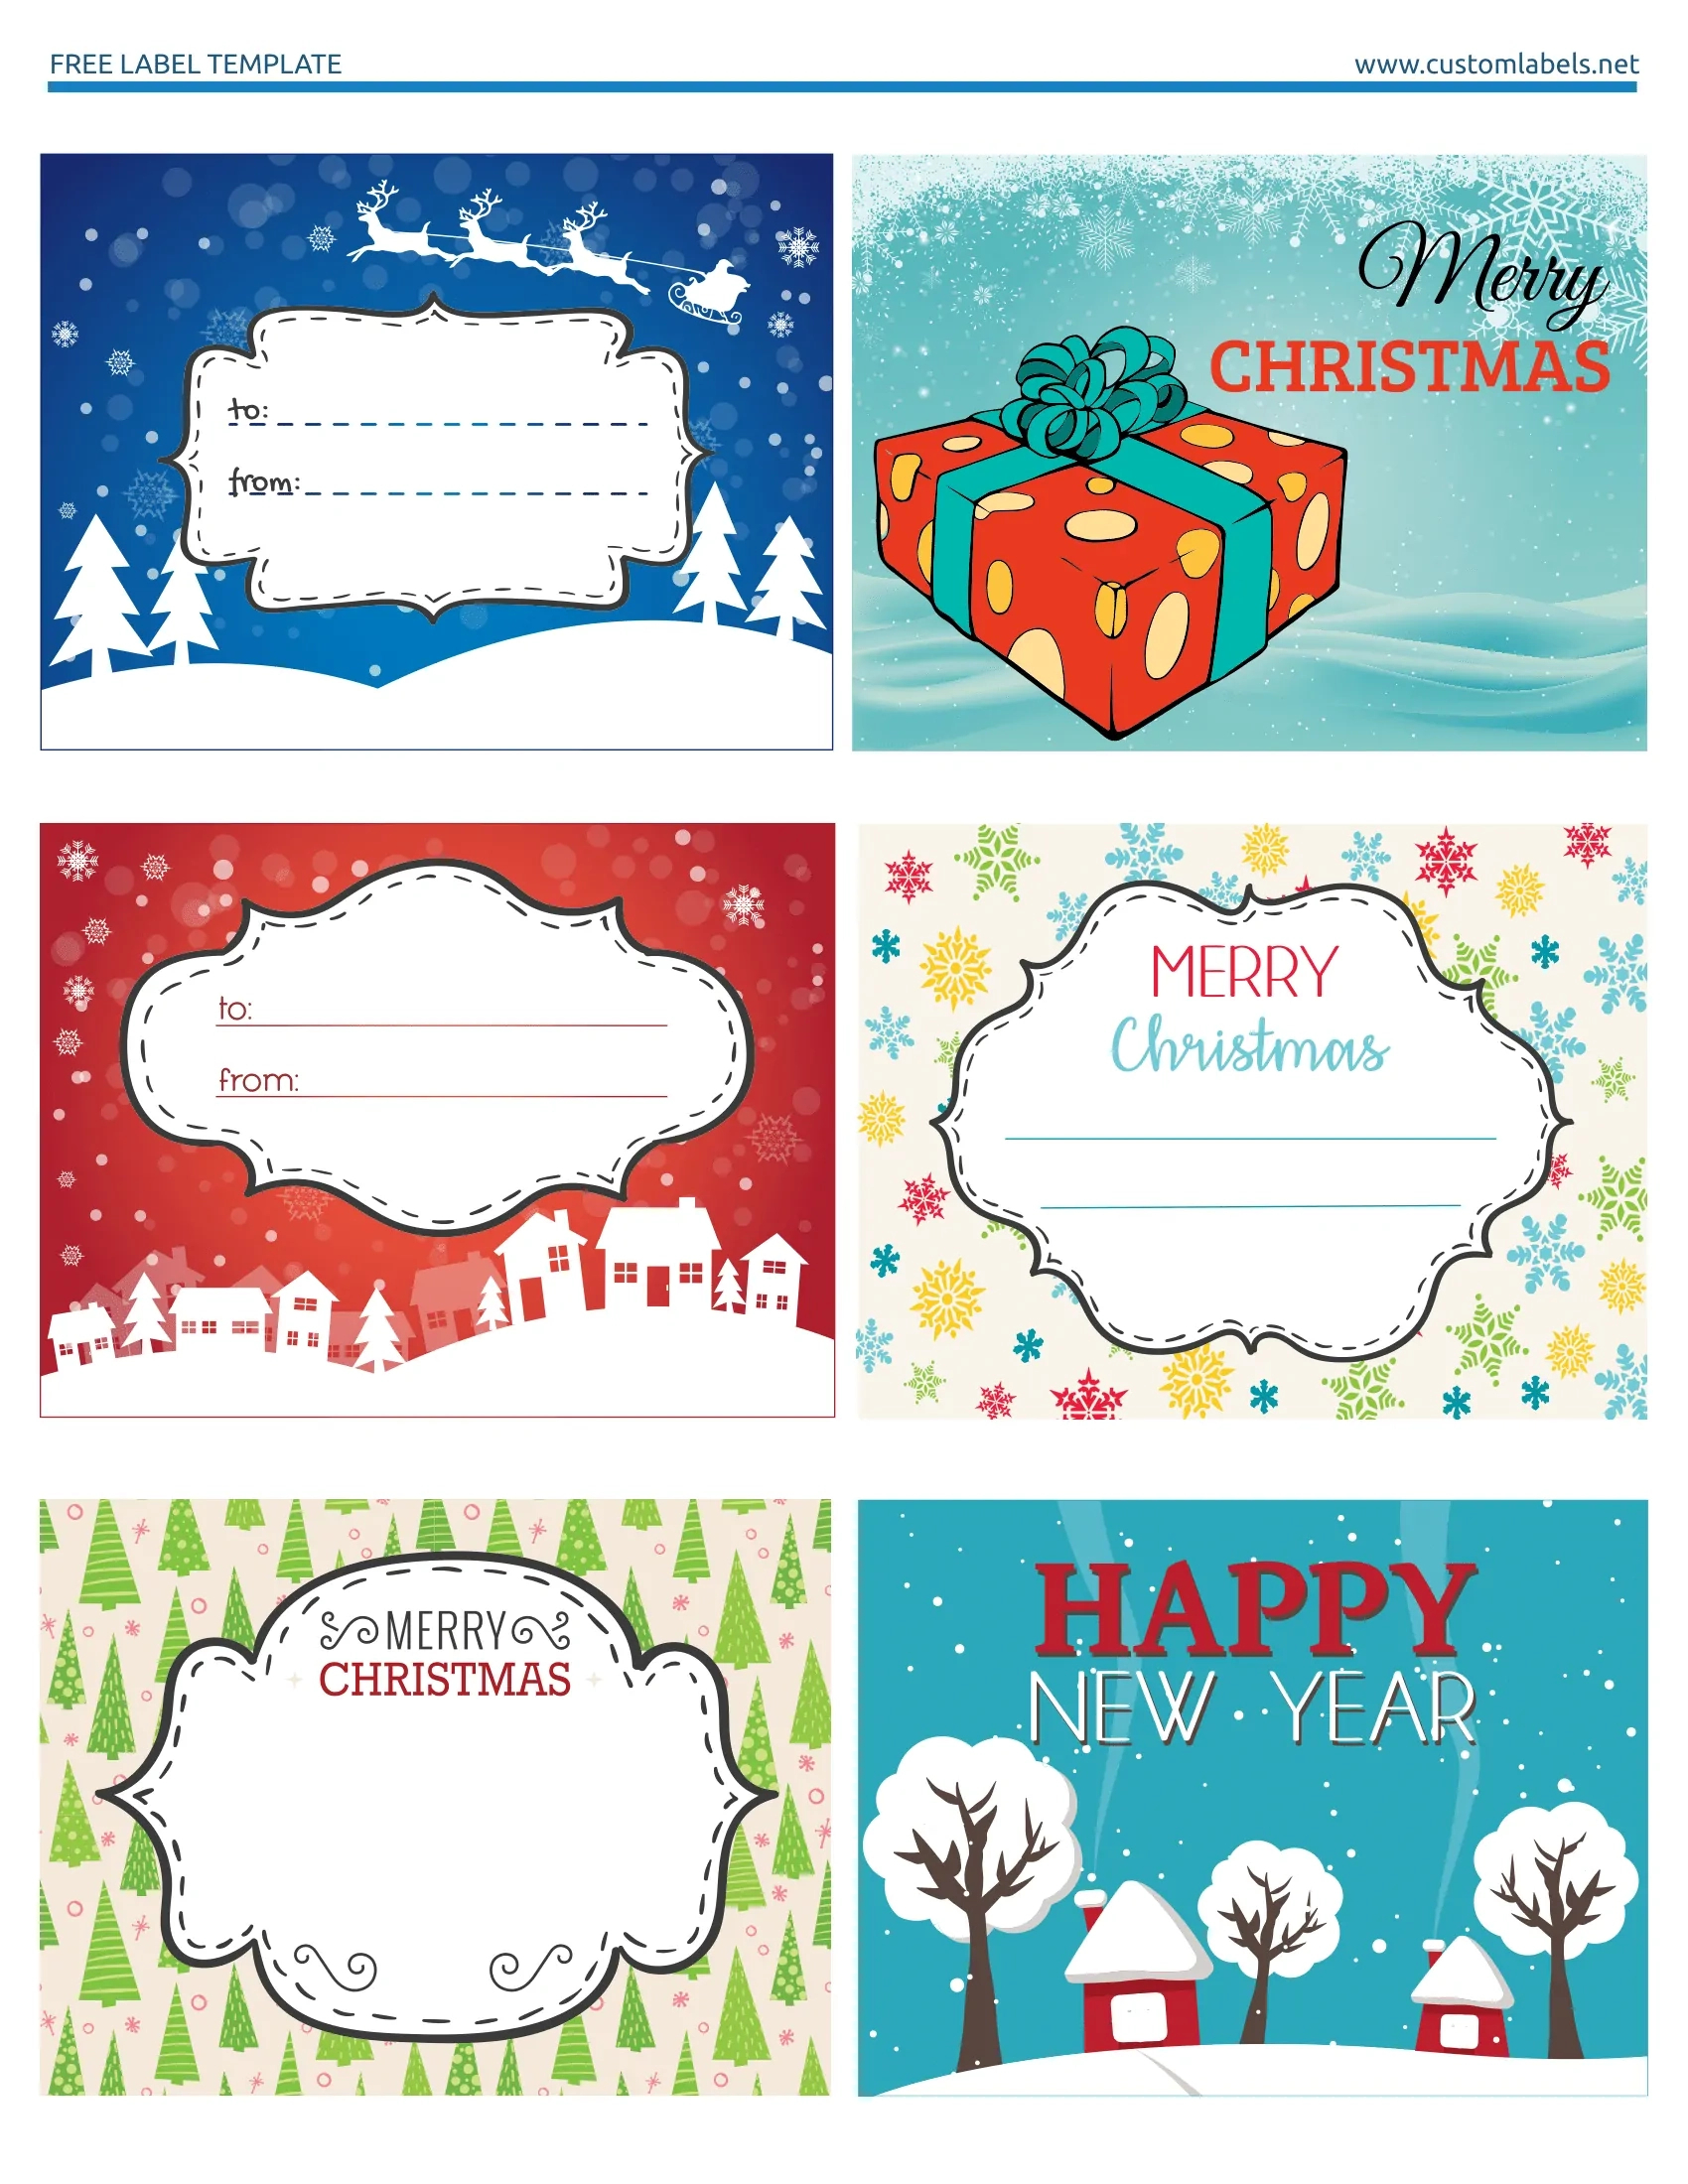 Fun And Colorful Christmas Labels - Free Printables - Free Printable Christmas Labels Word